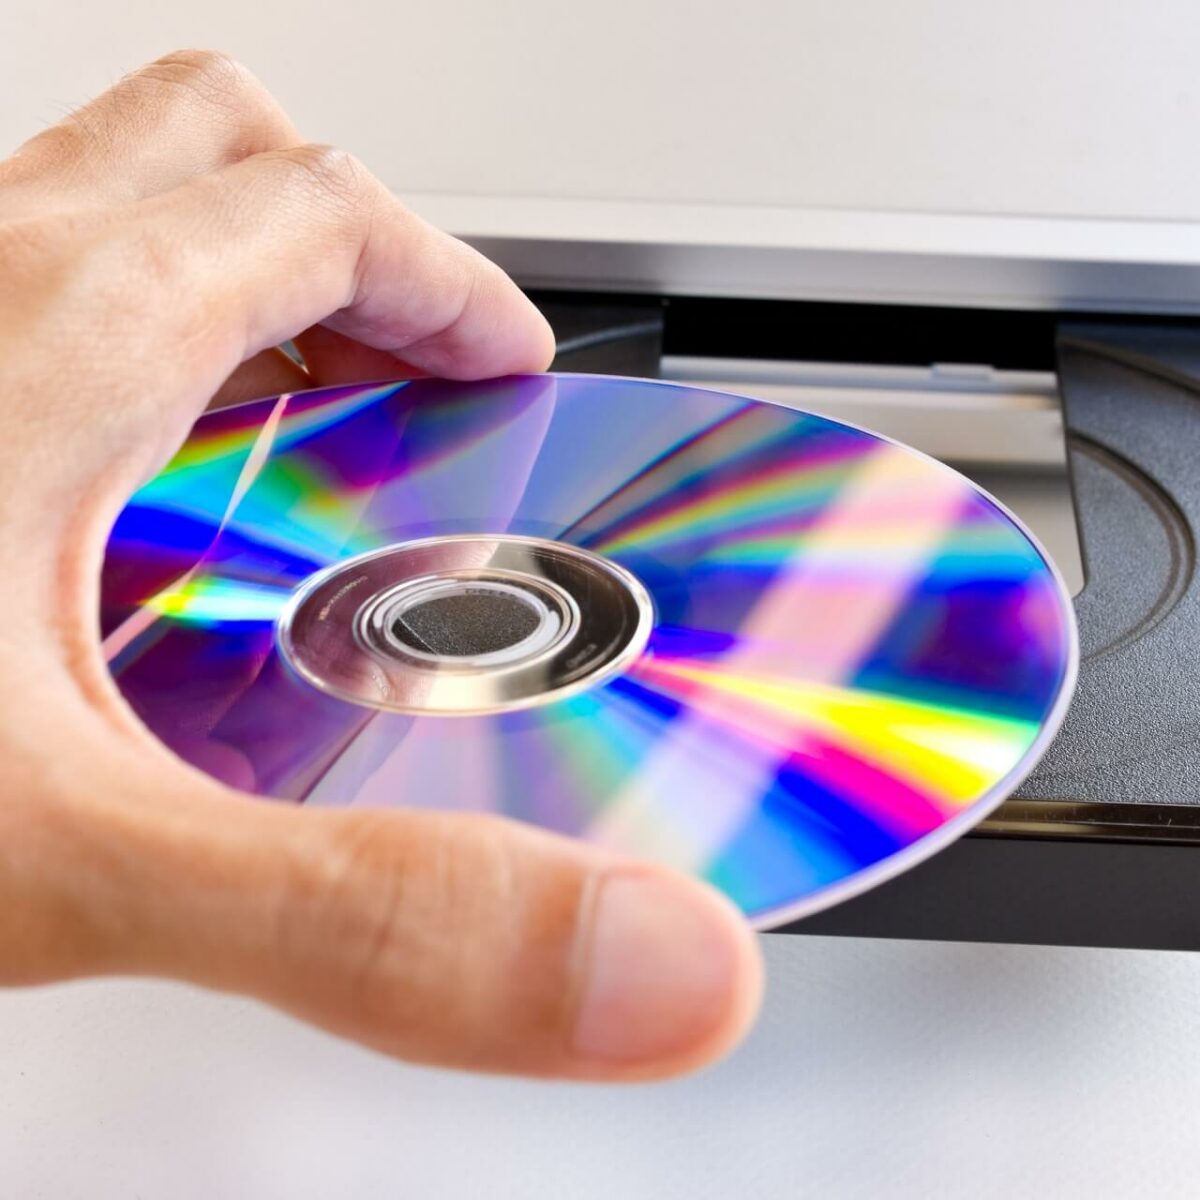 how to play copy protected dvds on your computer windows 7